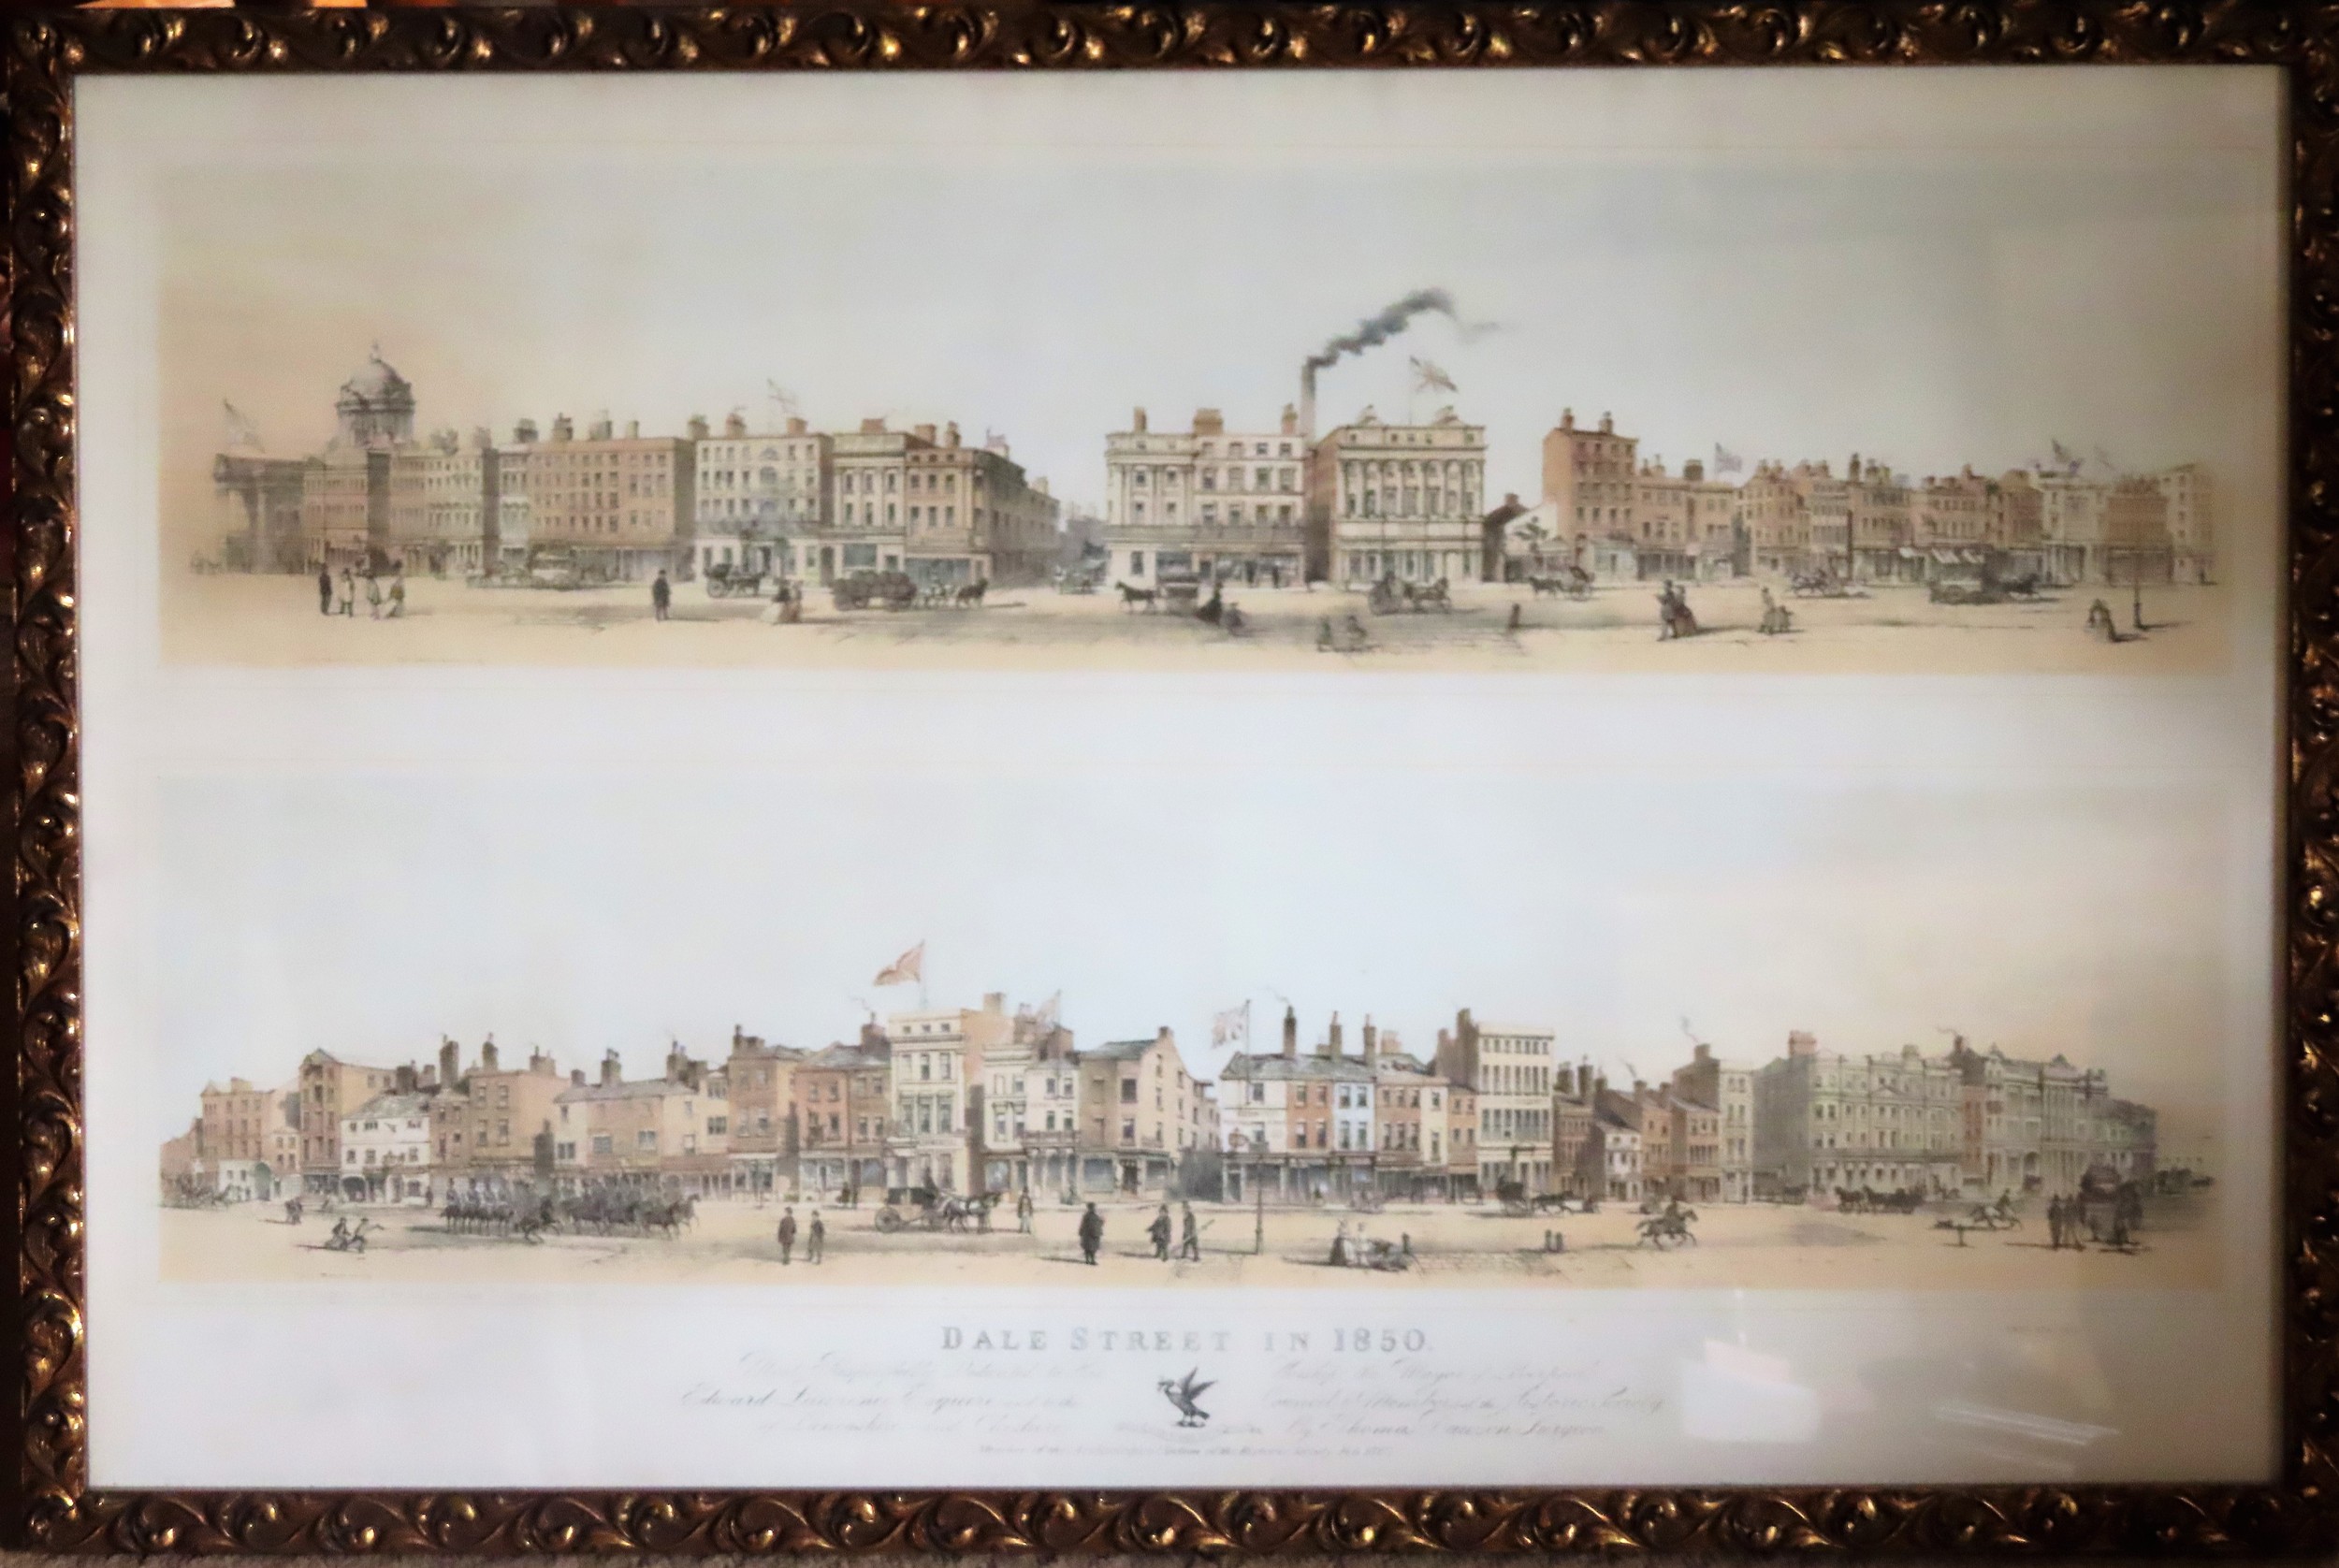 John Mc Gahey colour lithograph depicting Dale Street. App. 55 x 85cm Appears in reasonable used